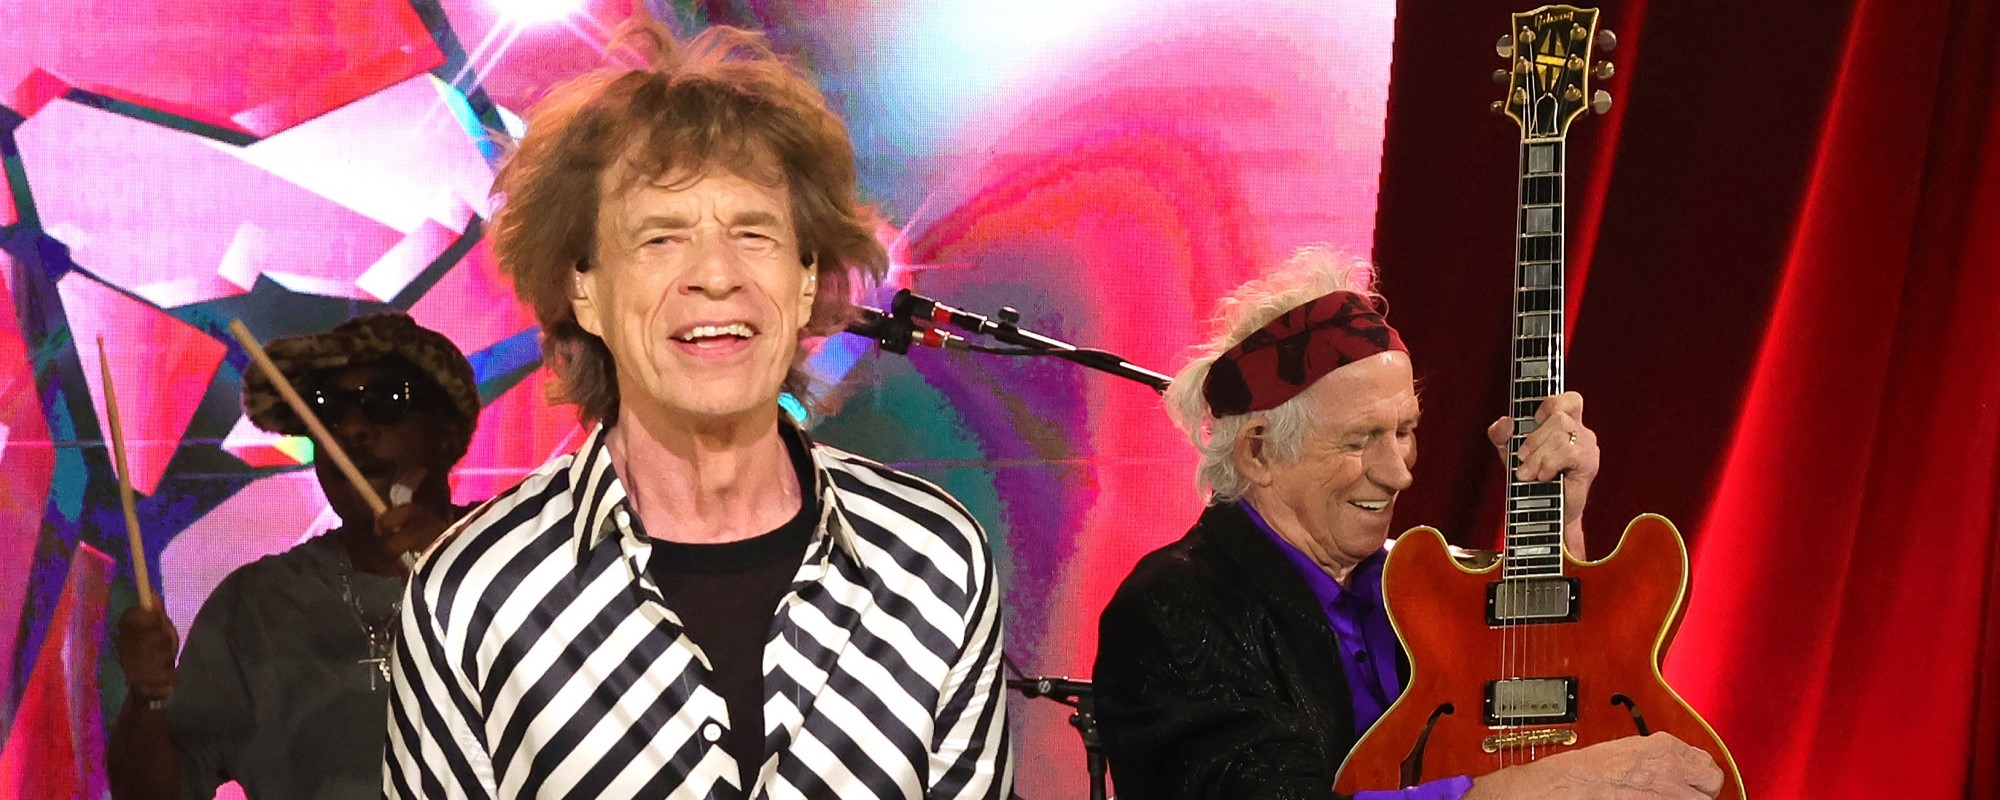 Houston, We Have a Rock Star: Mick Jagger Visits NASA’s Johnson Space Center Ahead of Rolling Stones Tour